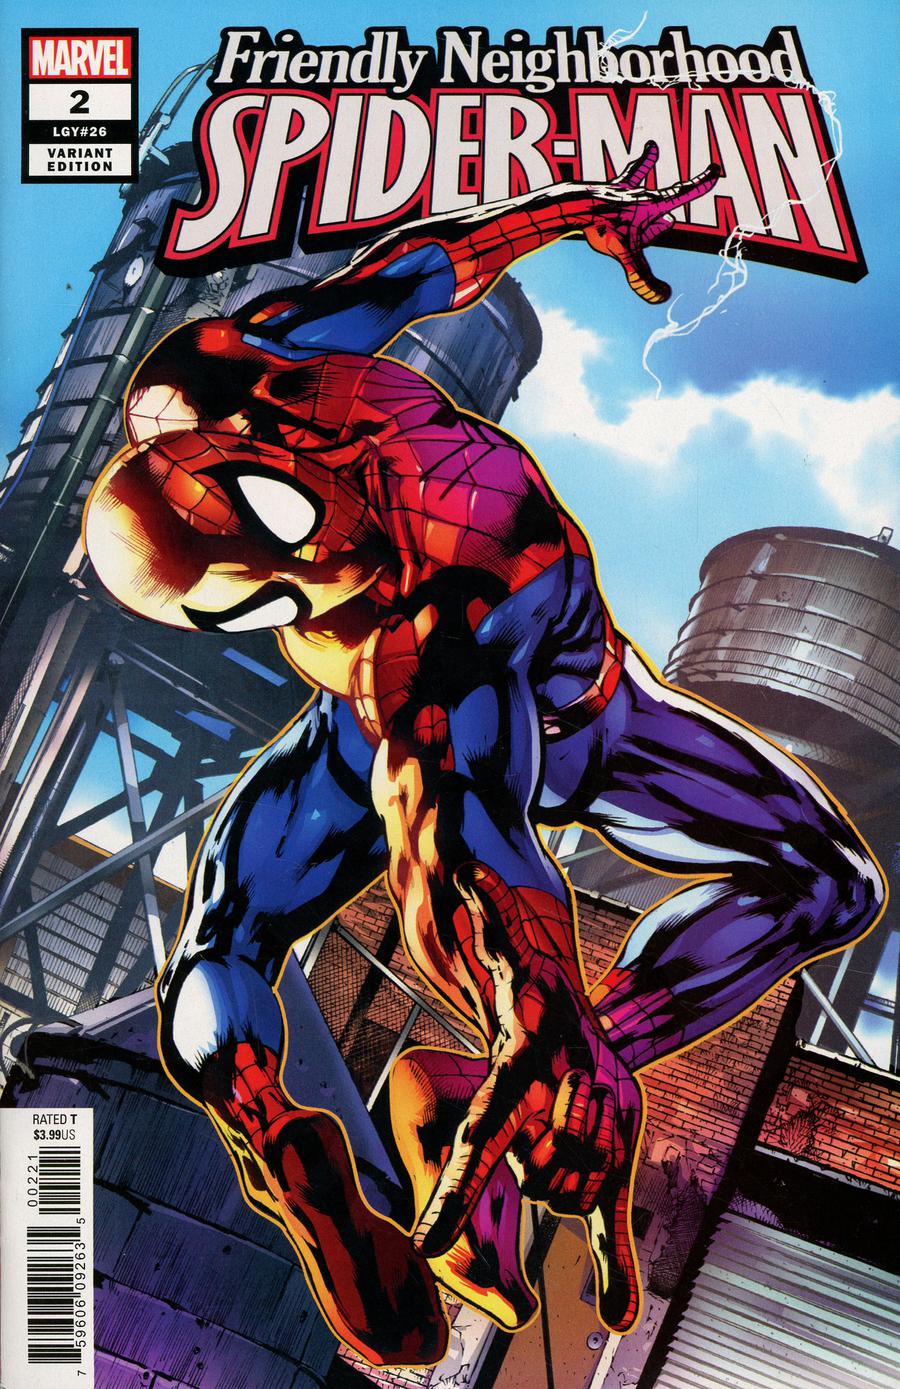 Friendly Neighborhood Spider-Man Vol 2 #2 Cover B Incentive Bryan Hitch Variant Cover